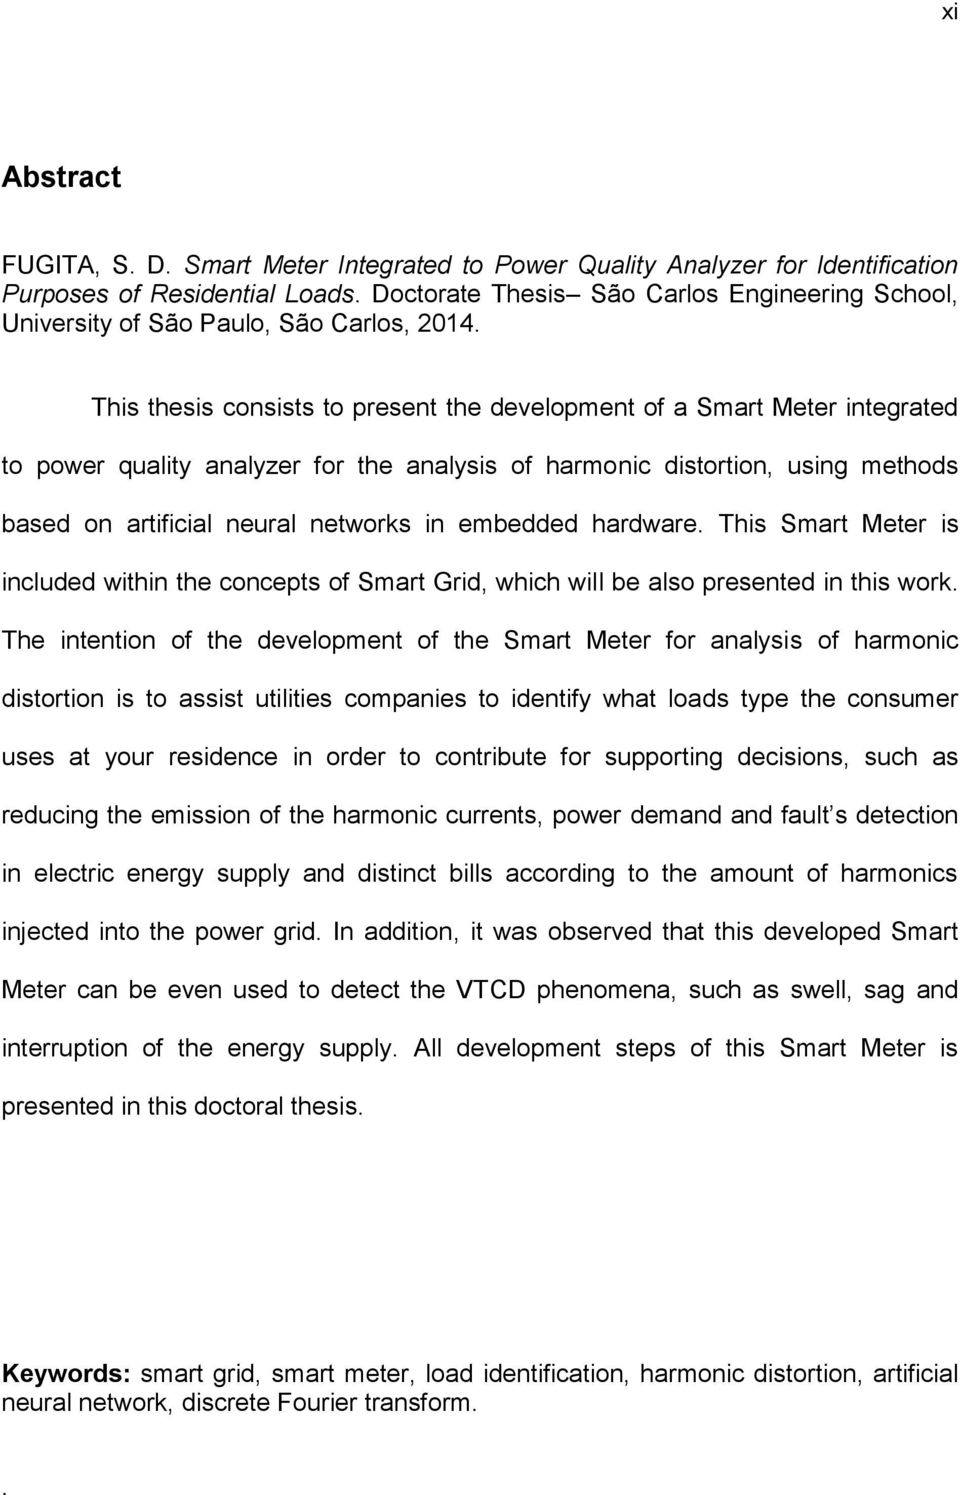 This thesis consists to present the development of a Smart Meter integrated to power quality analyzer for the analysis of harmonic distortion, using methods based on artificial neural networks in